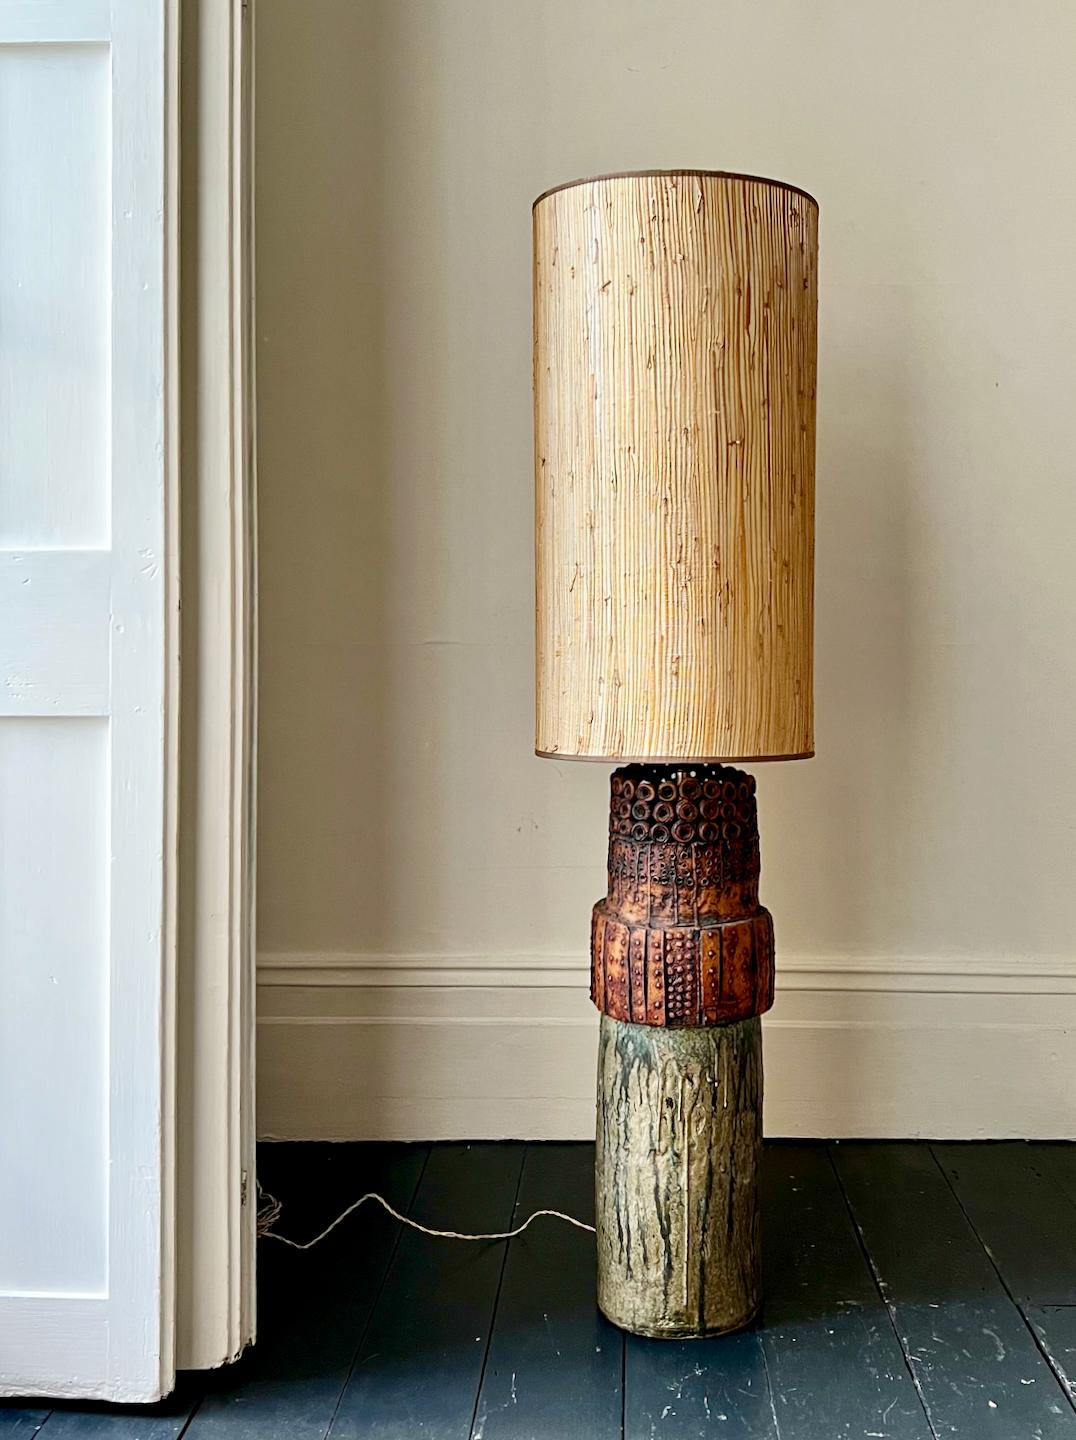 A monumental and unusual lamp by British potter, Bernard Rooke. An early piece, probably dating from the 1960s, and initialled BR on the side.

Large-scale single-piece Rooke lamps are rare to see - kiln size often a limiting-factor - particularly